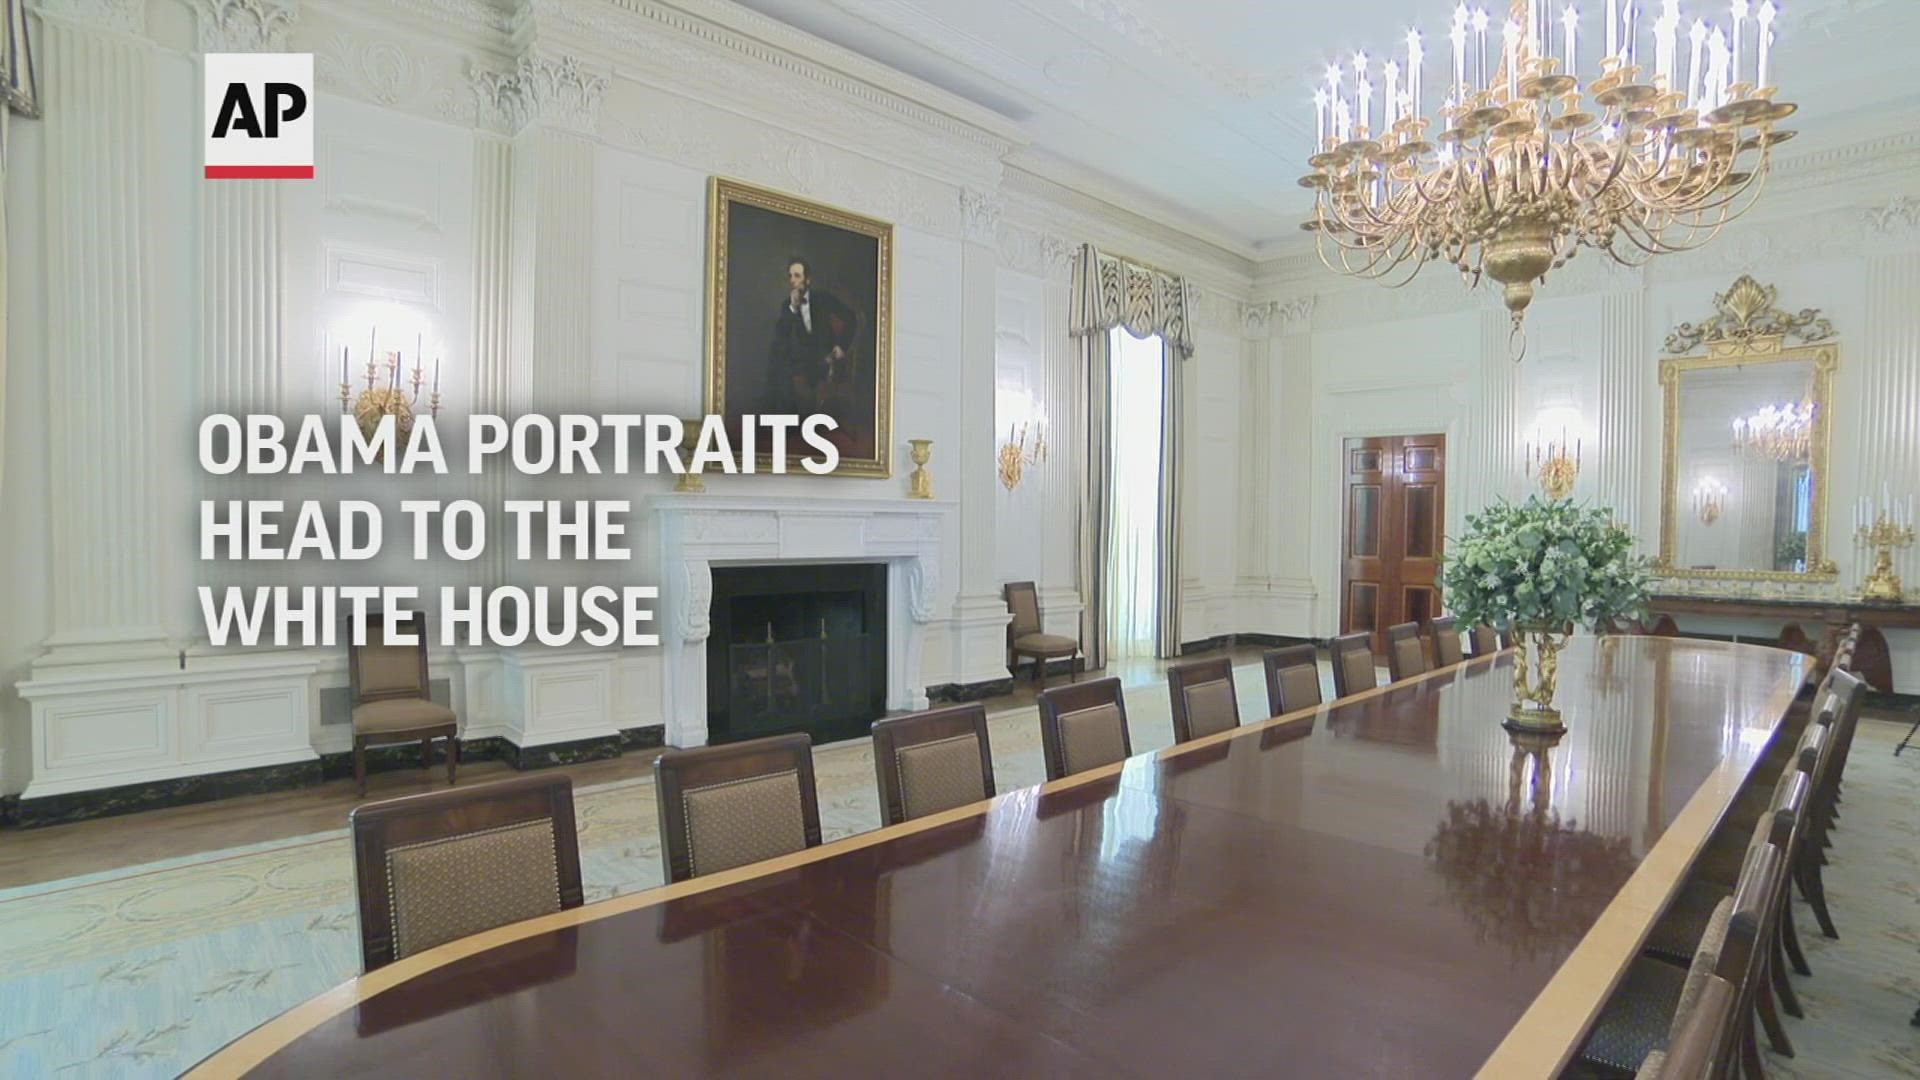 The White House will unveil official portraits of former US President Barack Obama and his wife Michelle Obama on September 7.